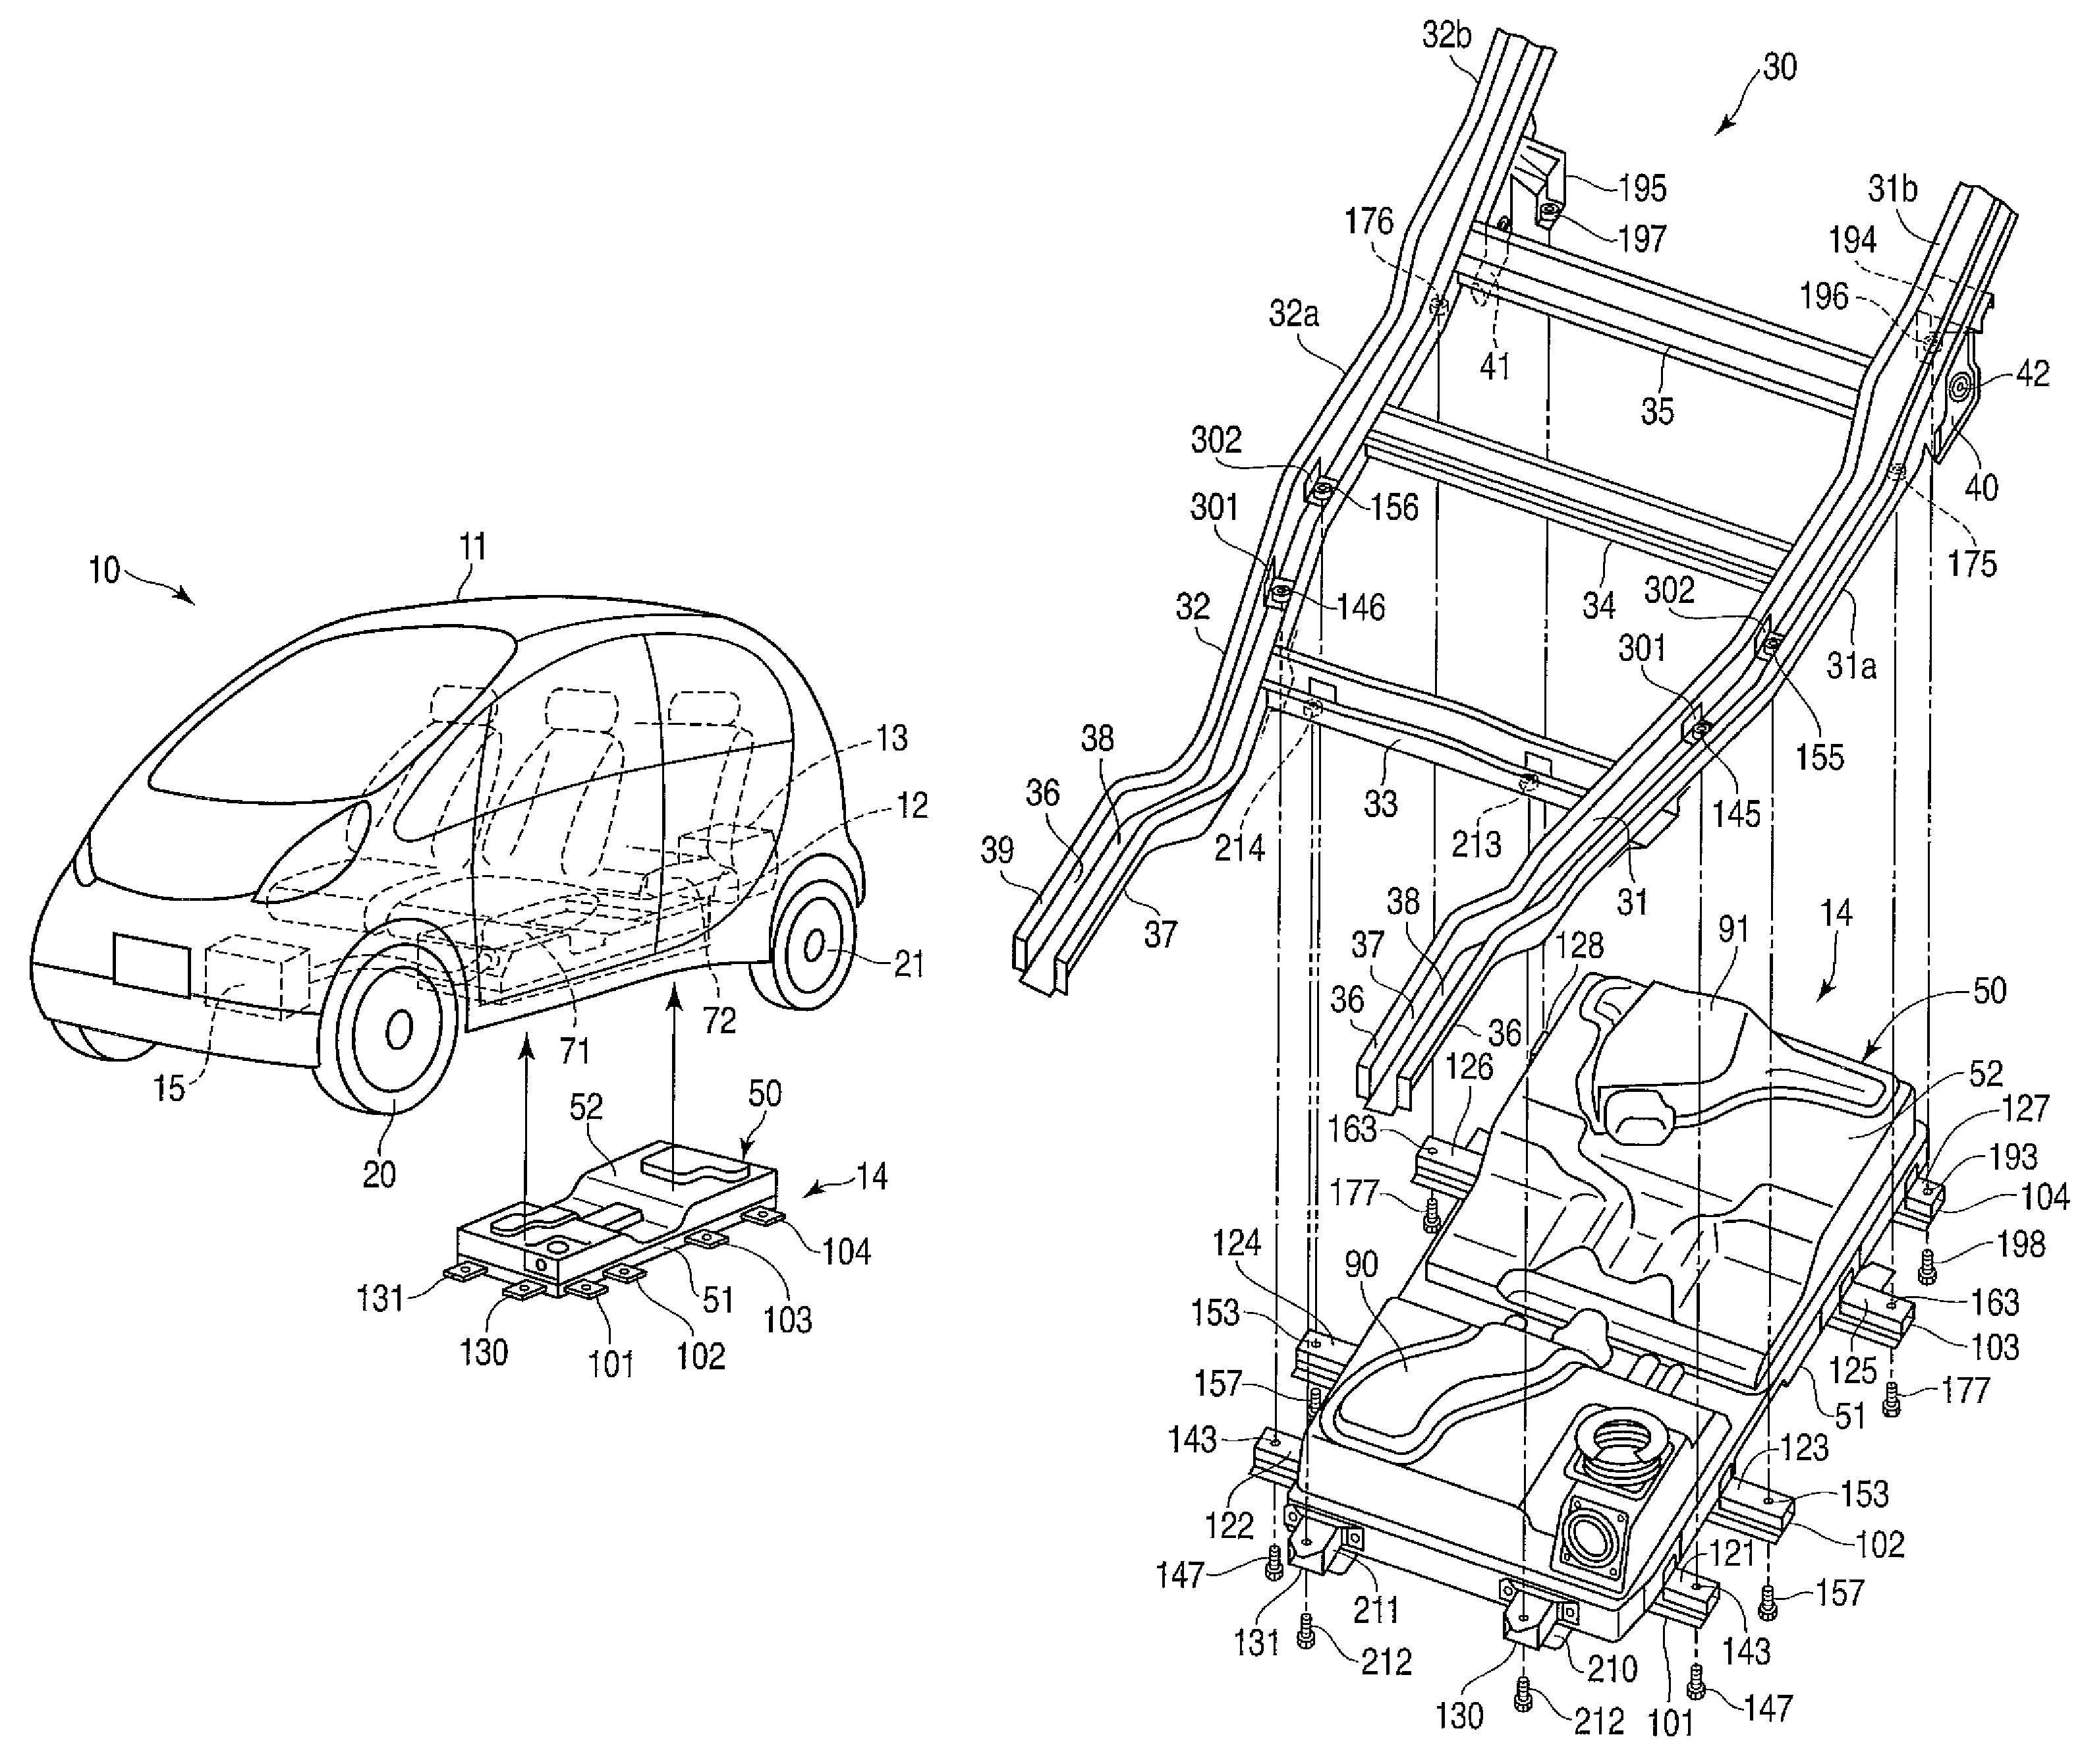 Battery unit mounting structure for electric vehicle